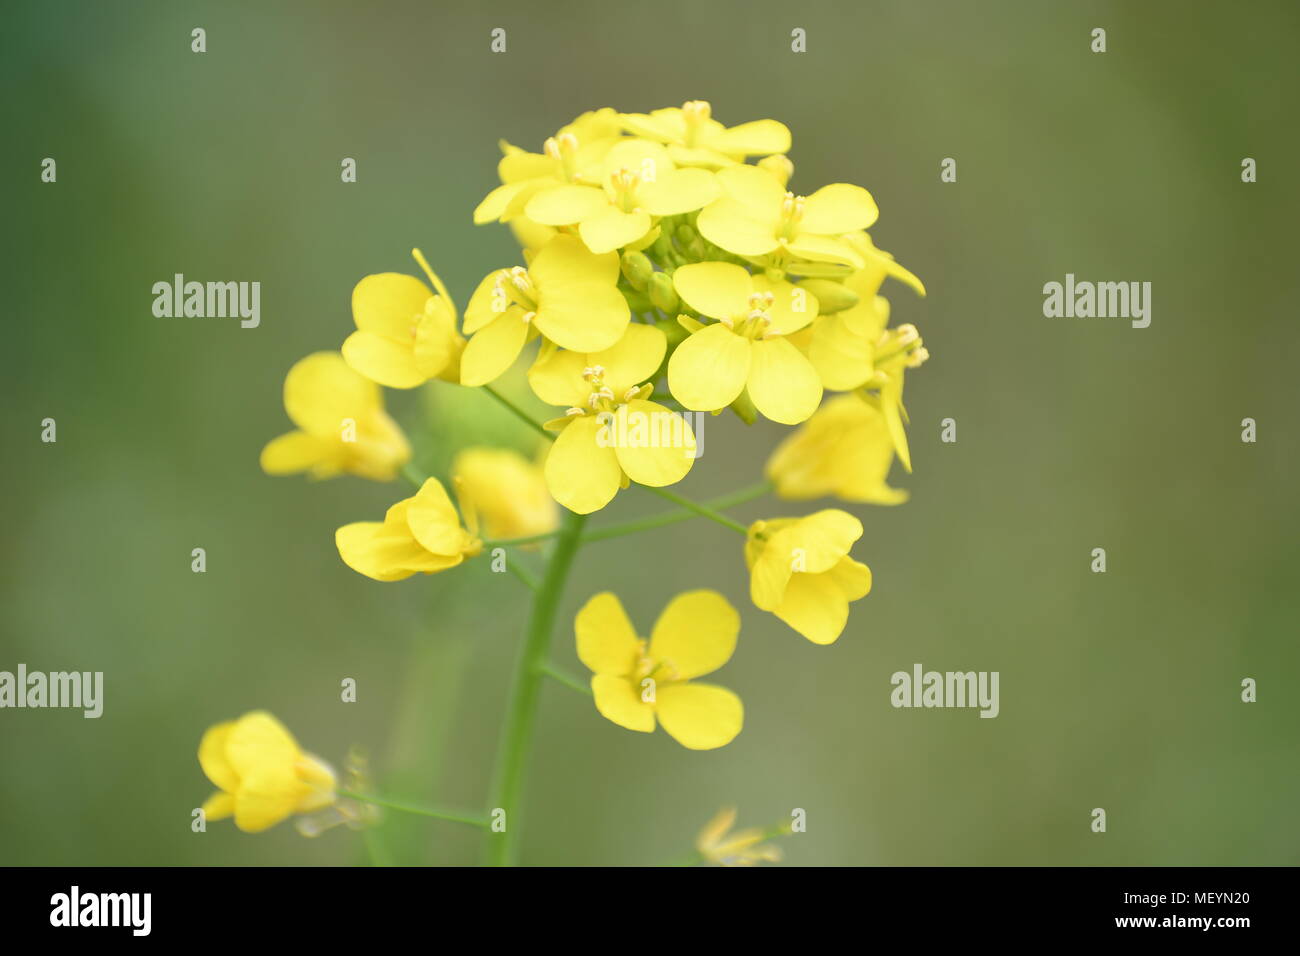 Cluster of tiny yellow flowers growing in an overgrown garden Stock Photo